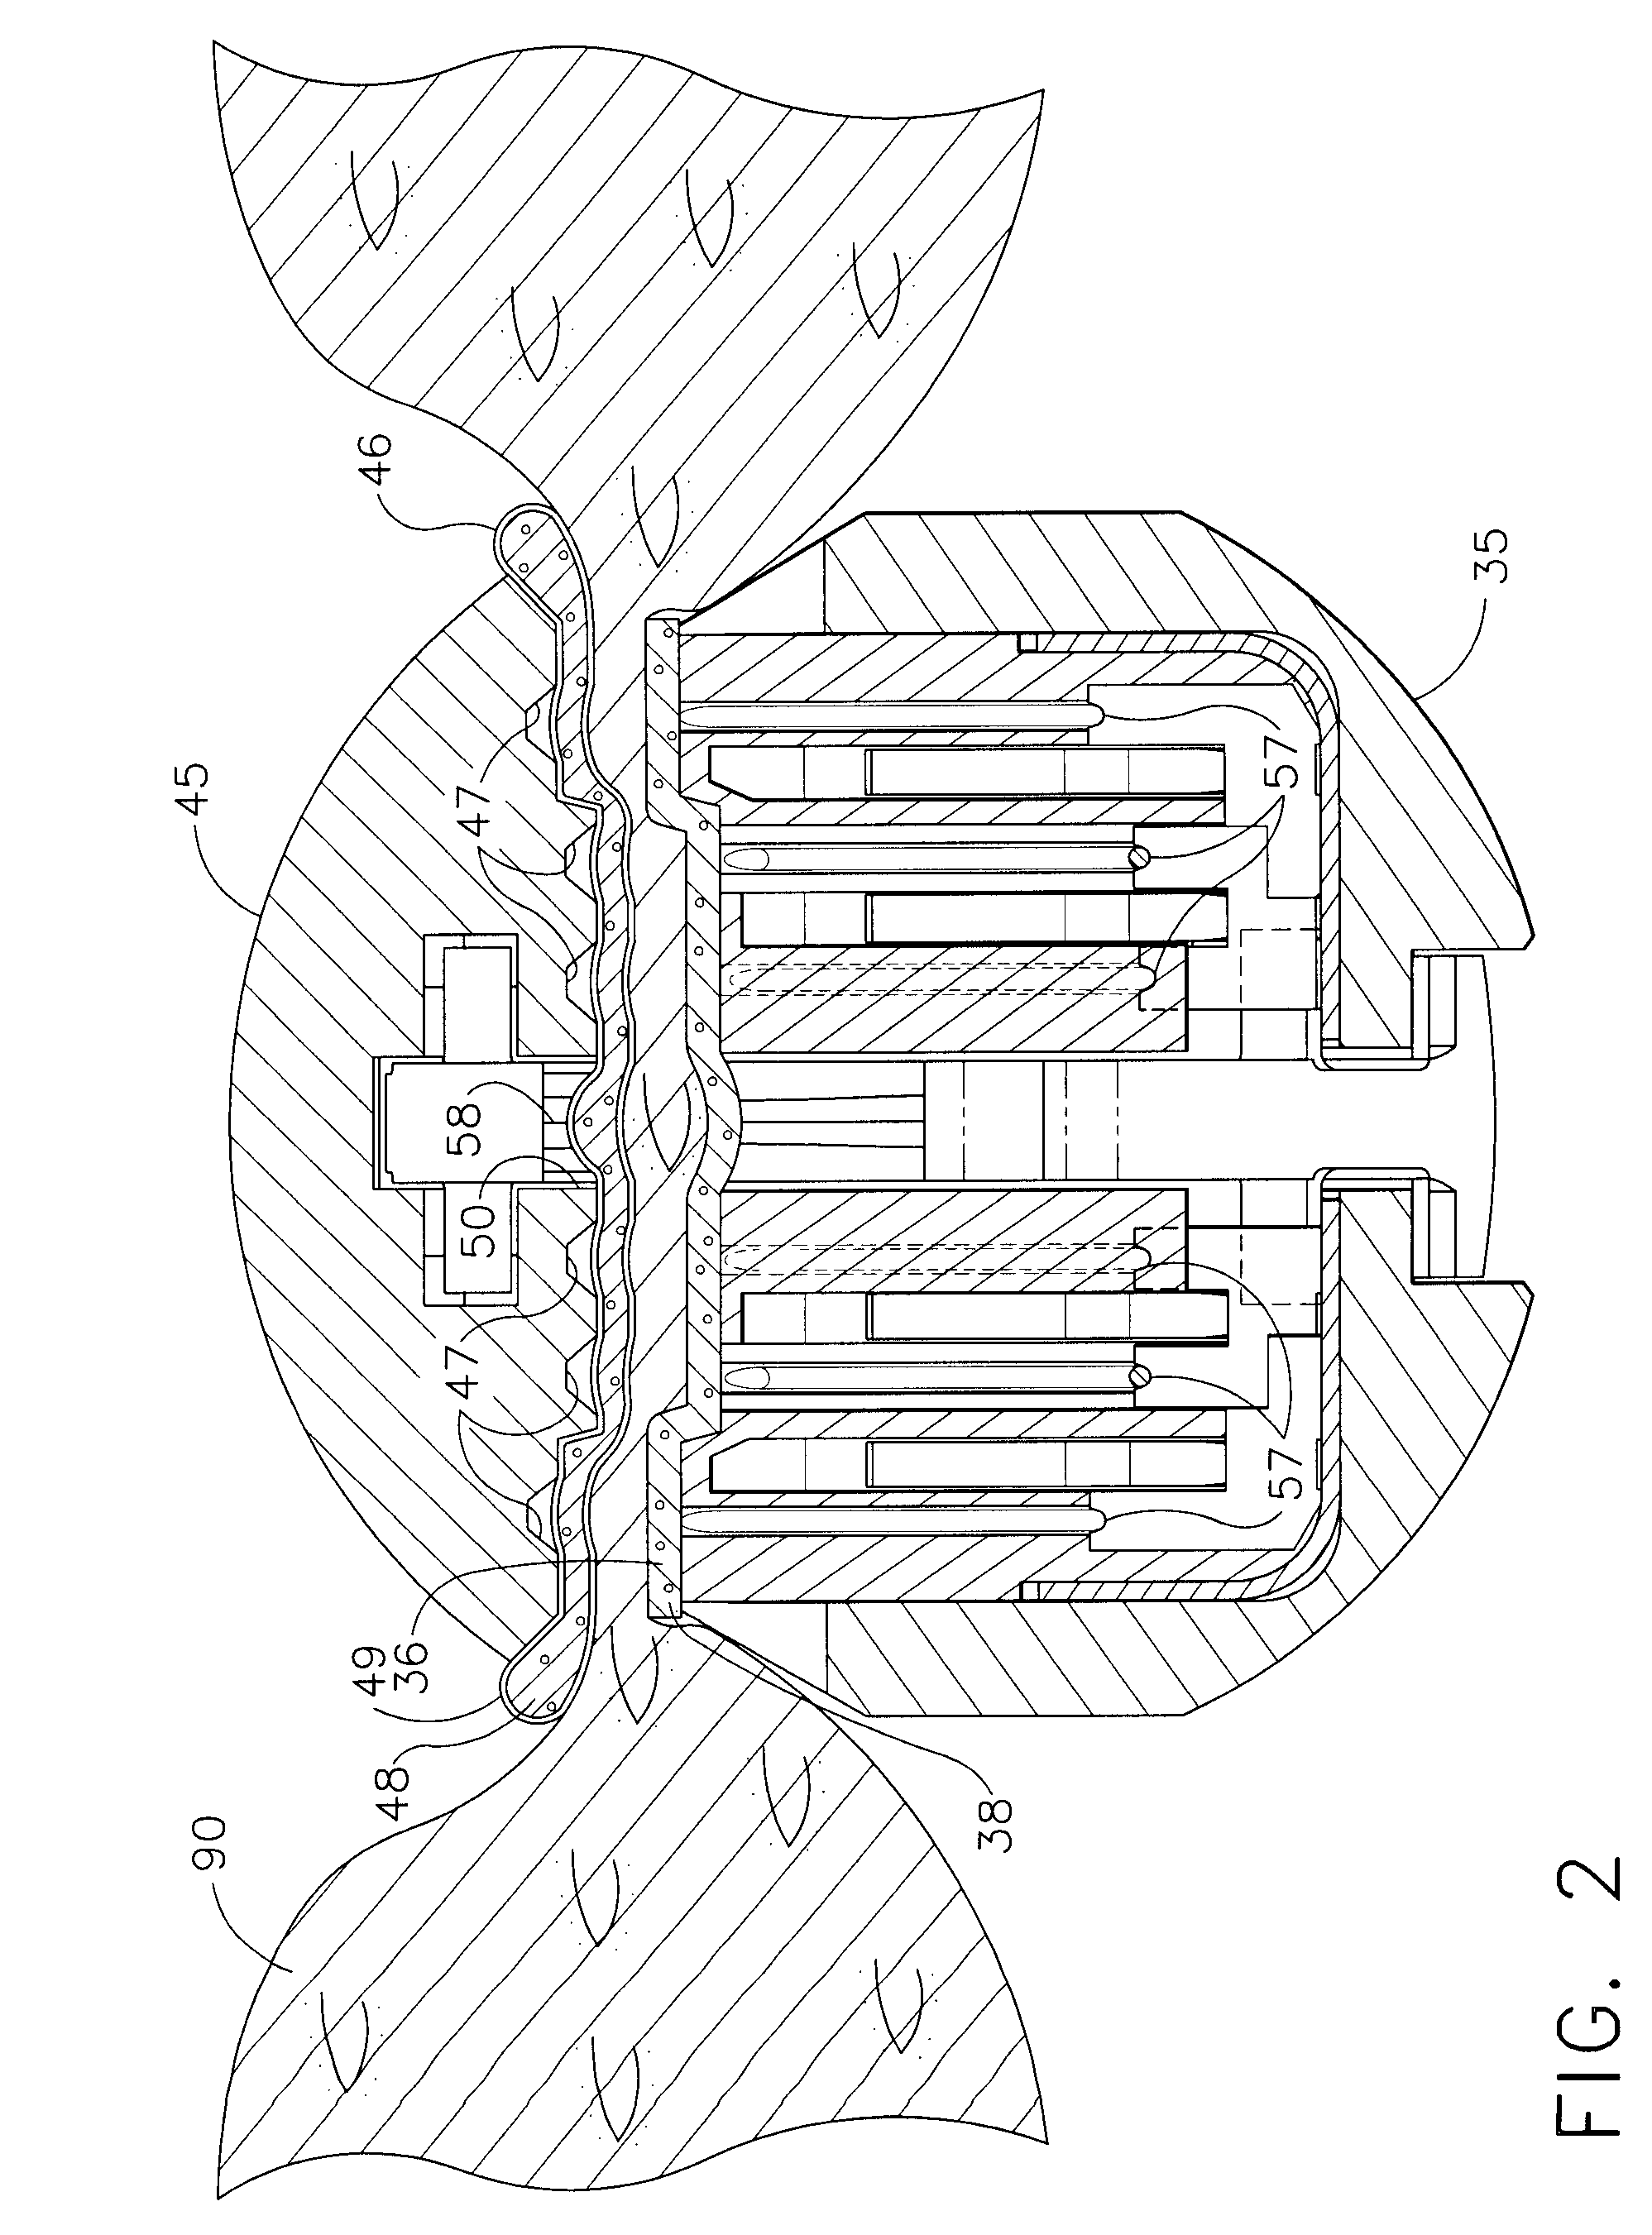 Surgical fastening device with initiator impregnation of a matrix or buttress to improve adhesive application